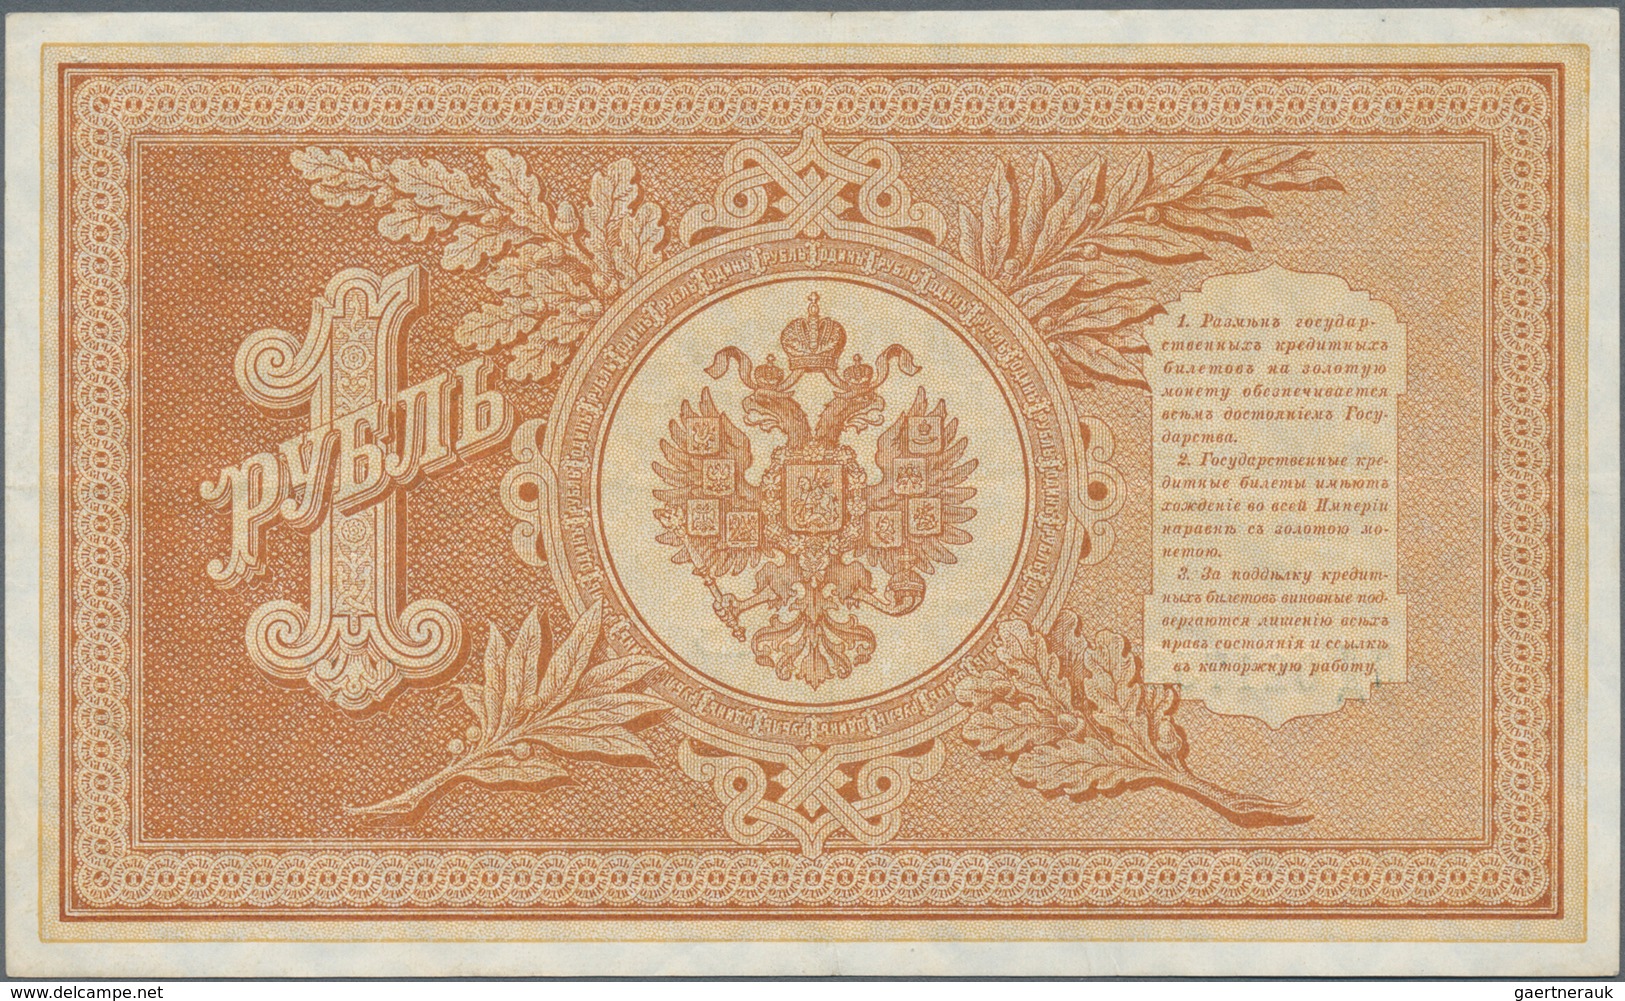 Russia / Russland: 1 Ruble 1898, P.1a With Signatures PLESKE/YA.METZ. Condition: XF - Russia